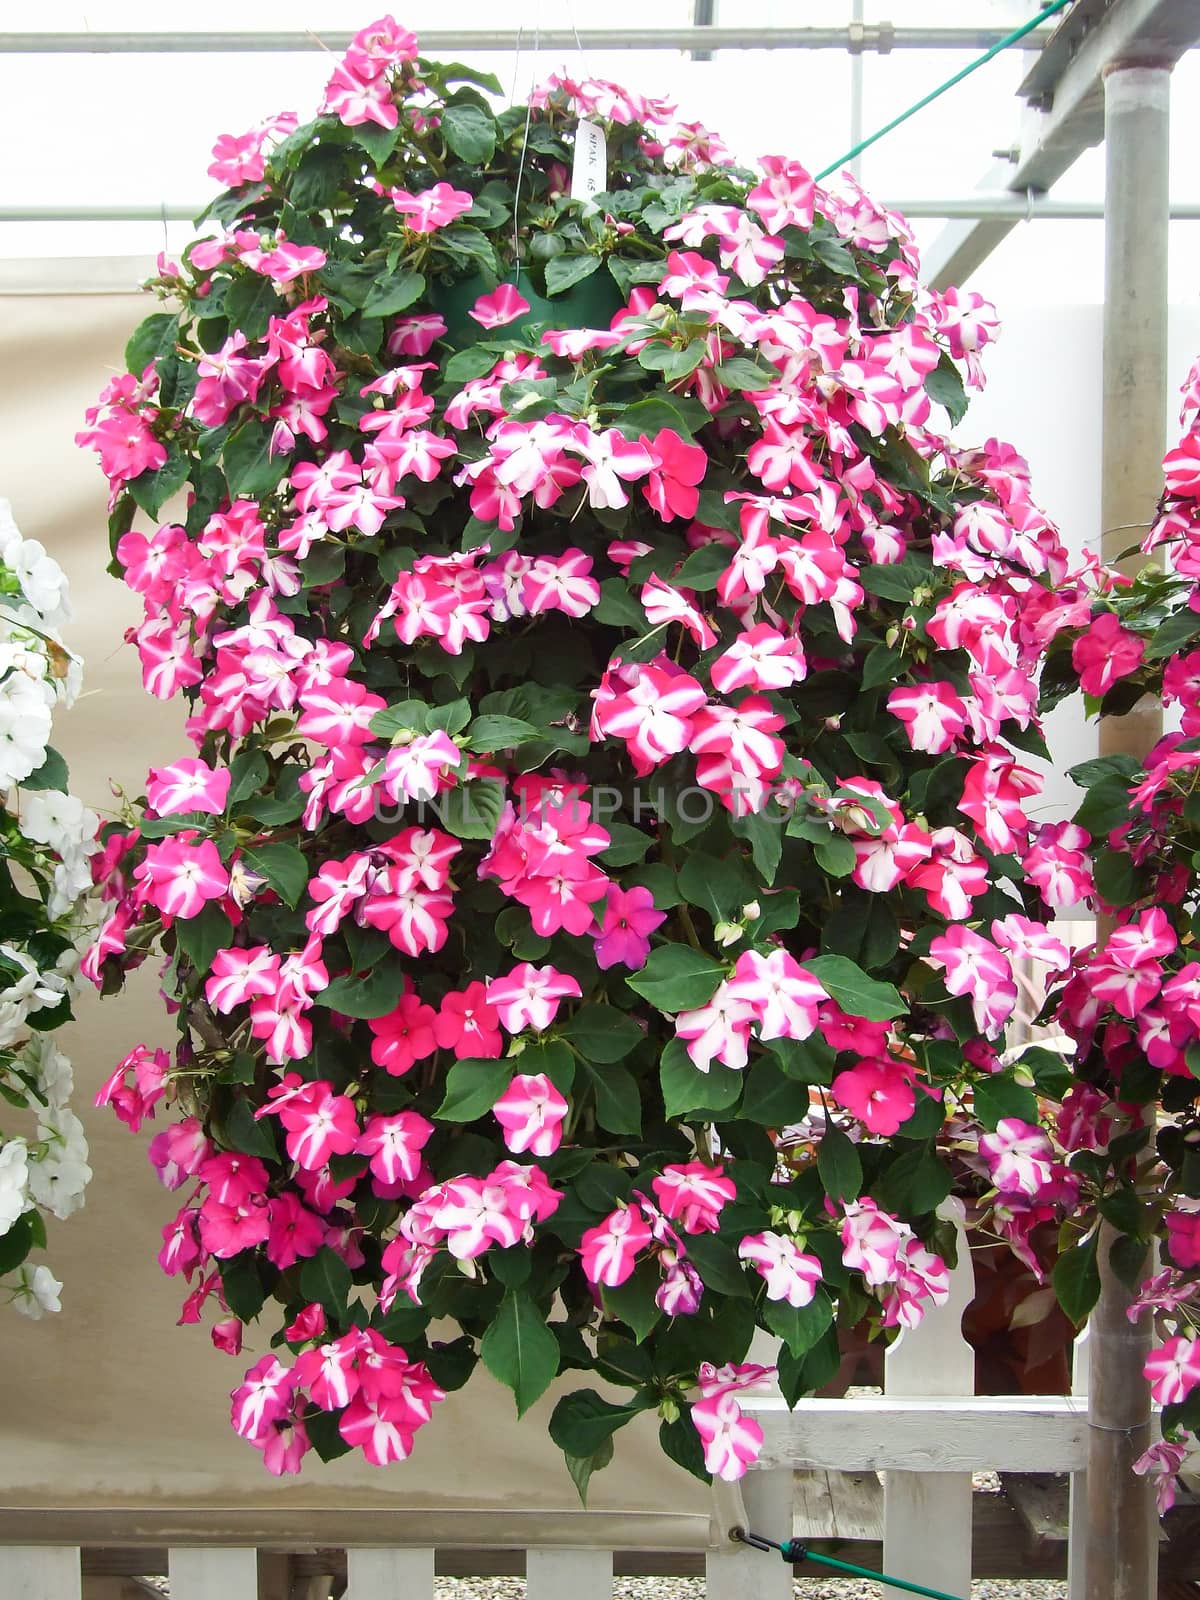 pink impatiens, scientific name Impatiens walleriana flowers also called Balsam, flowerbed of blossoms in pink, hanging flowers